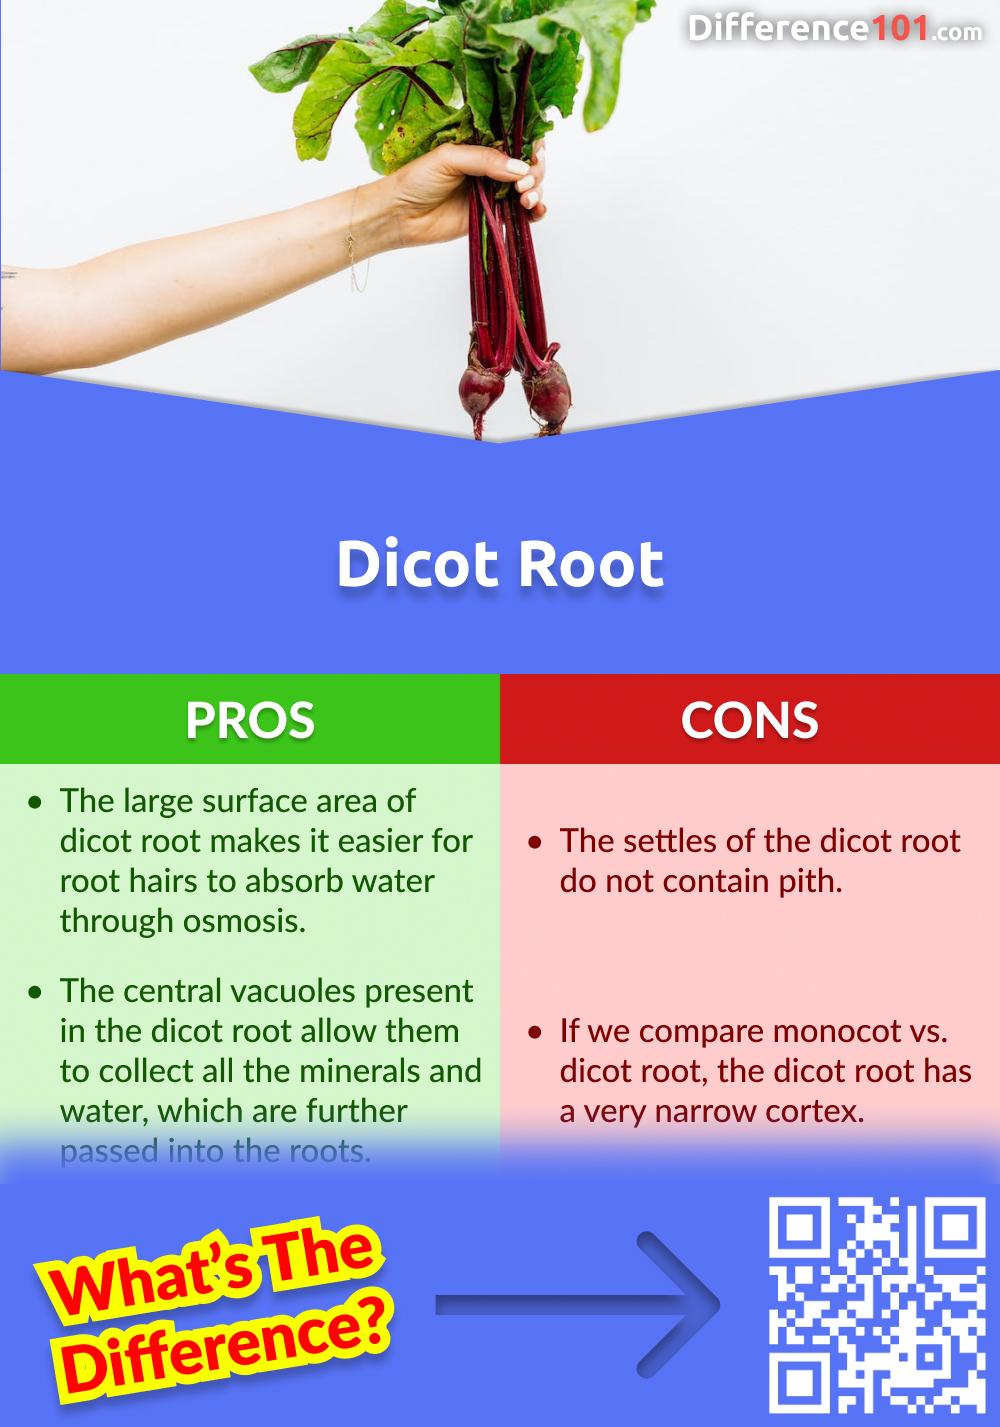 Dicot Root Pros and Cons